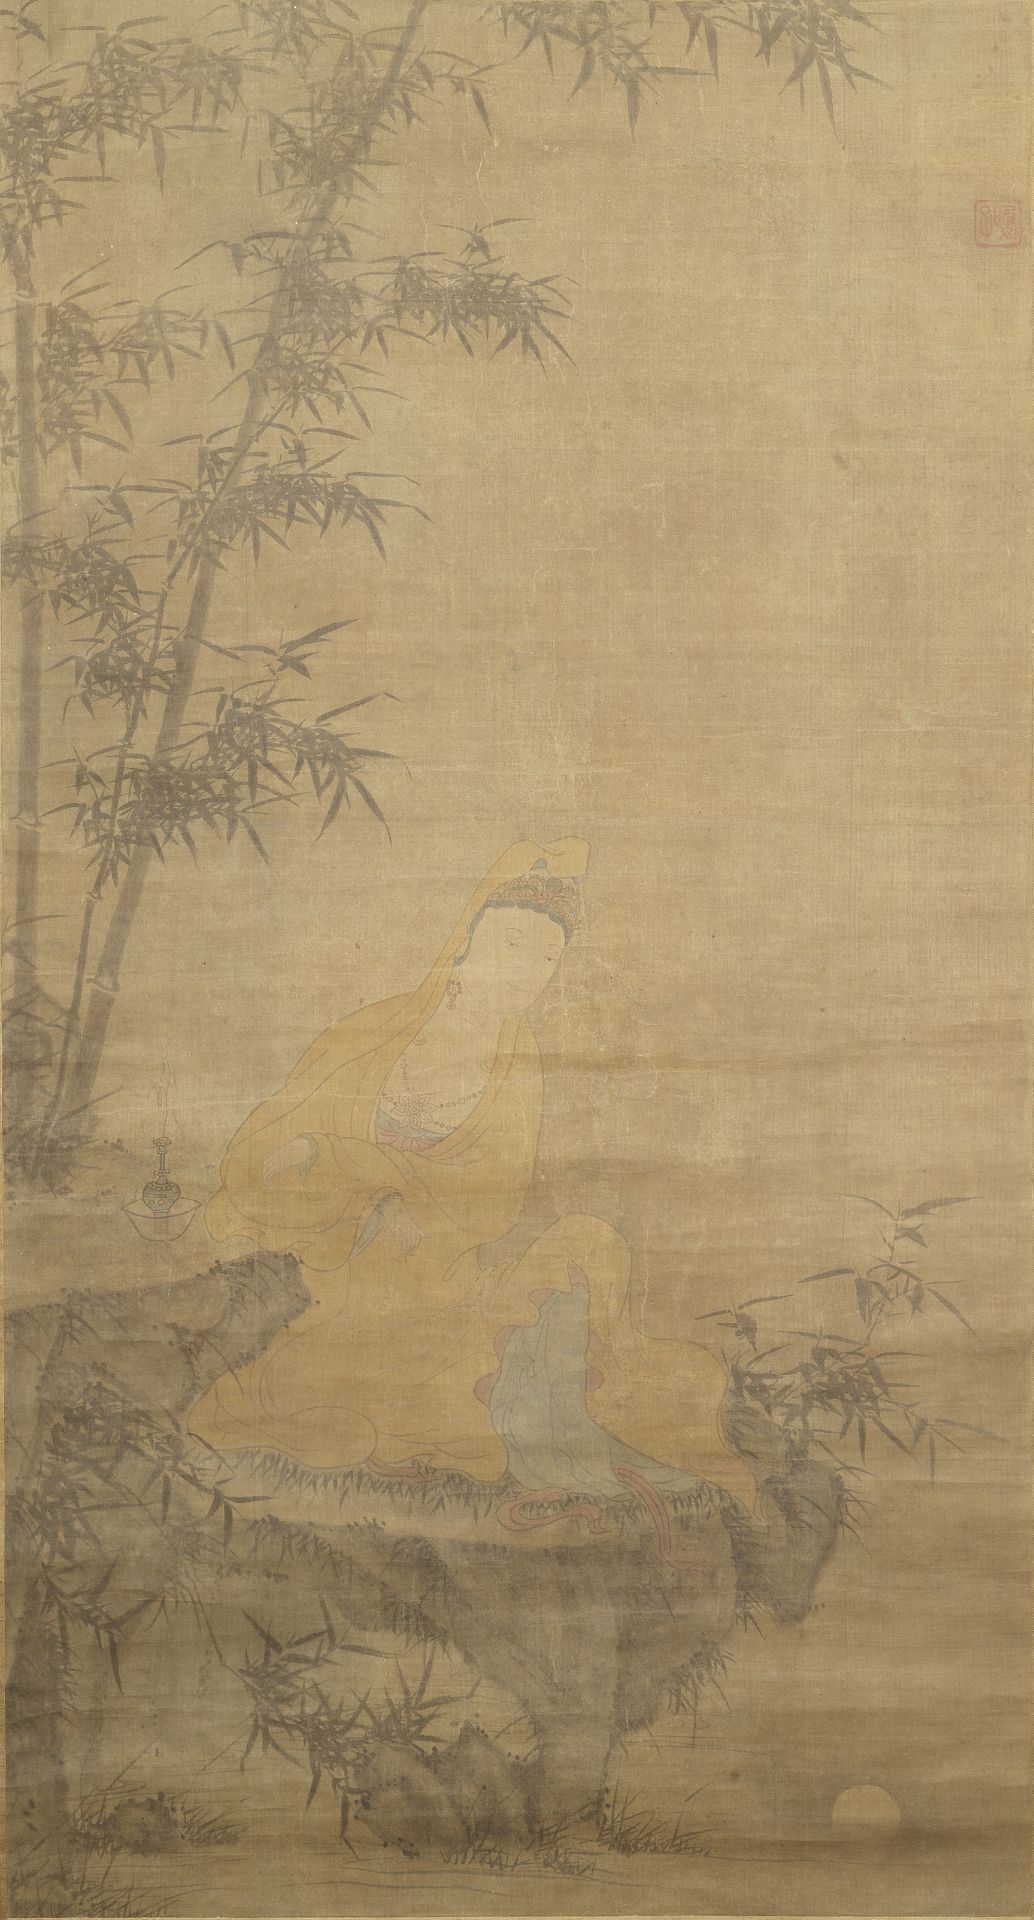 ATTRIBUTED TO YAOZI (YUAN DYNASTY) Water Moon Guanyin, 16th/17th century